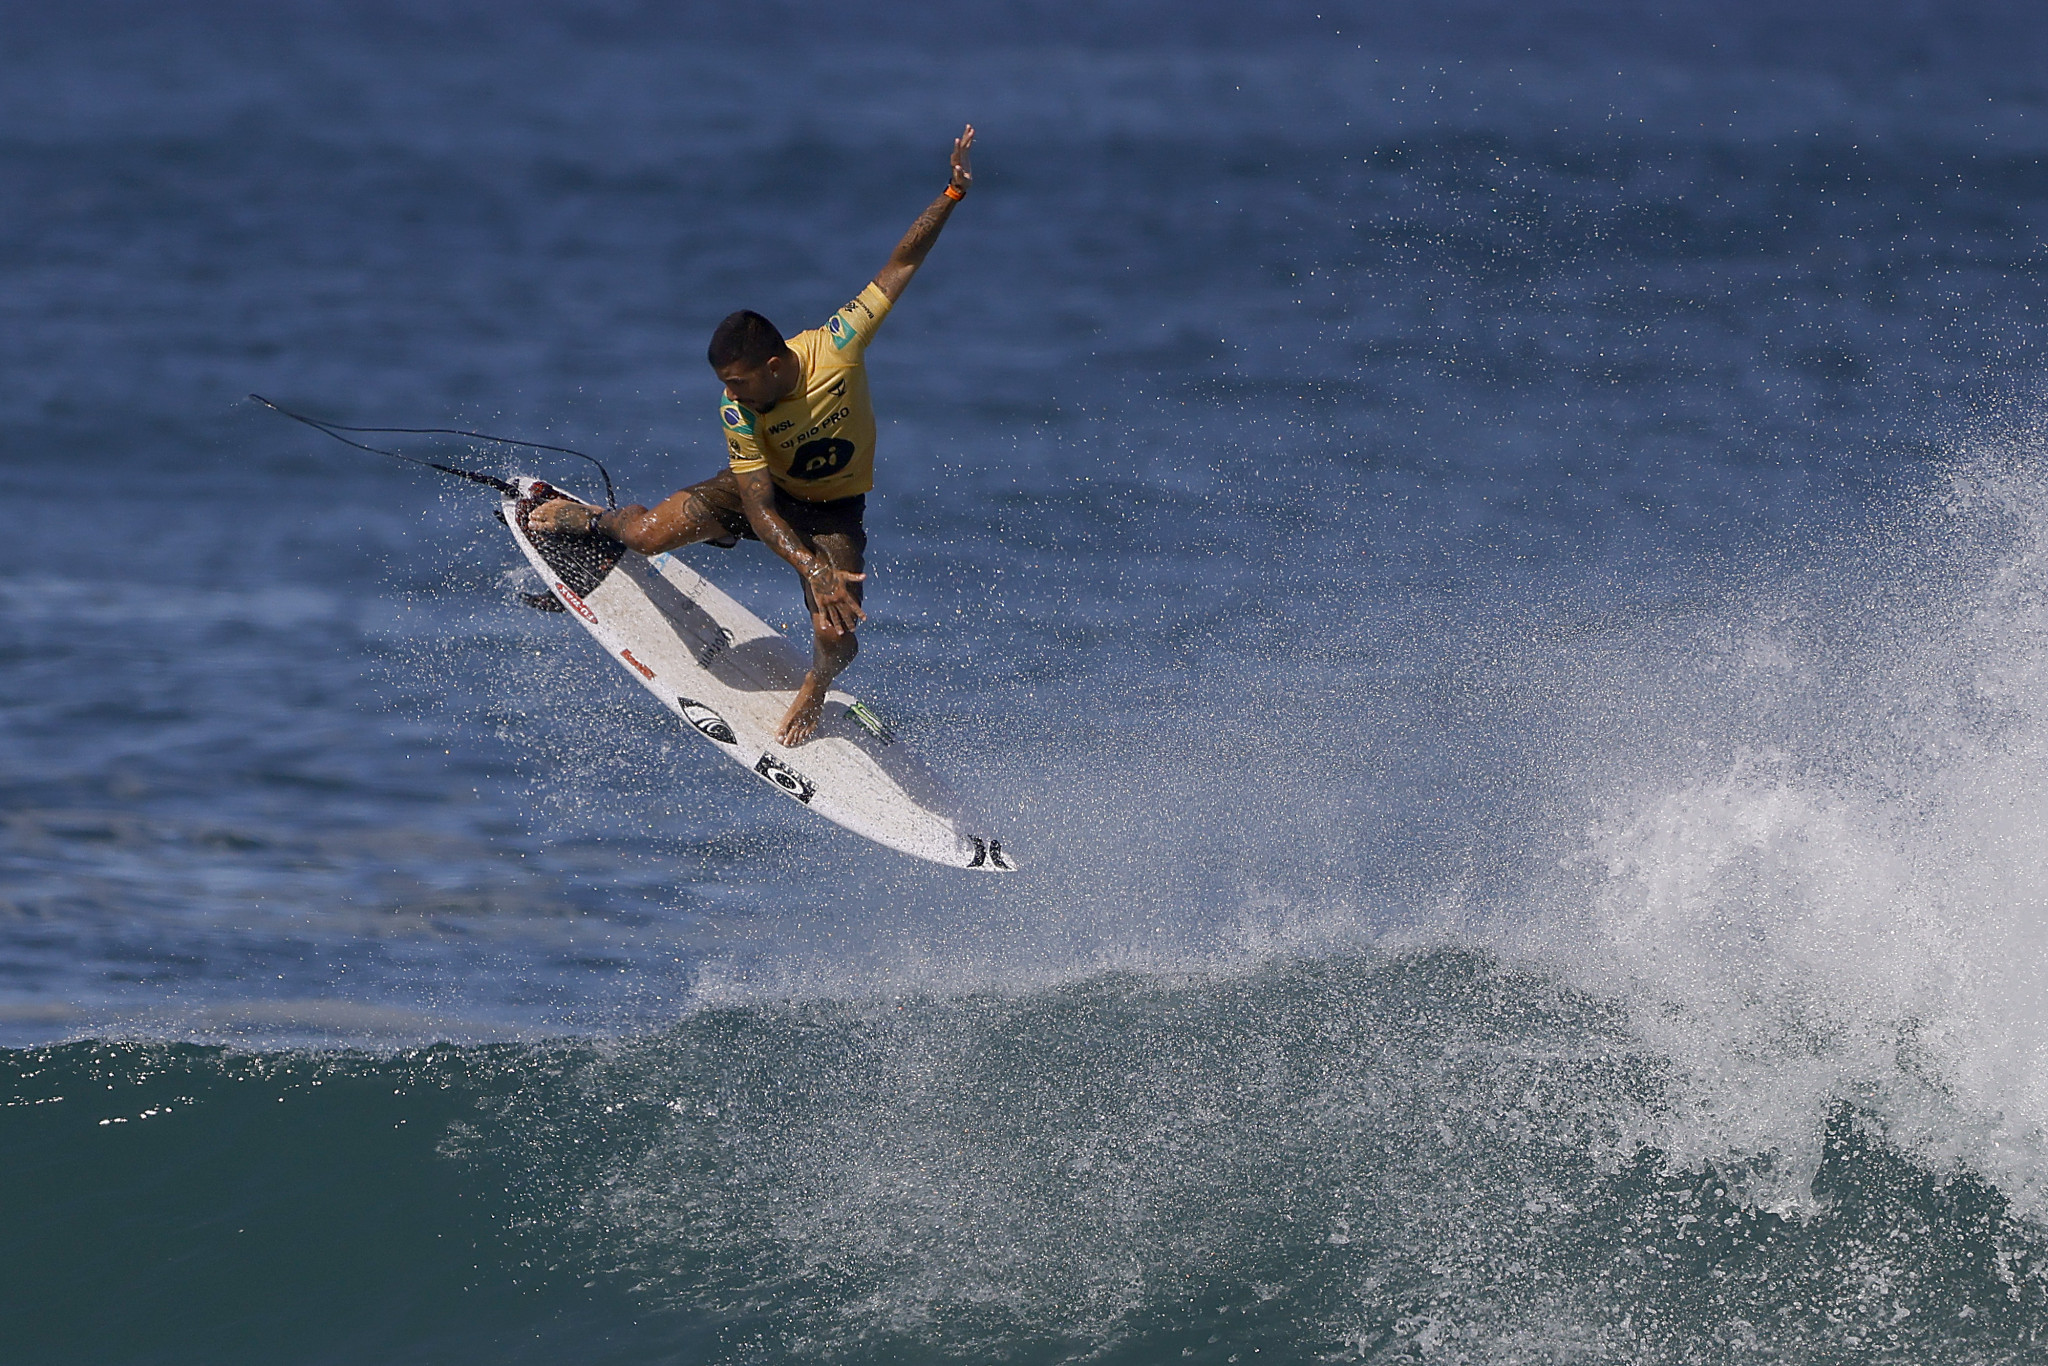 Filipe Toledo is aiming for his first WSL title in the men's event ©Getty Images